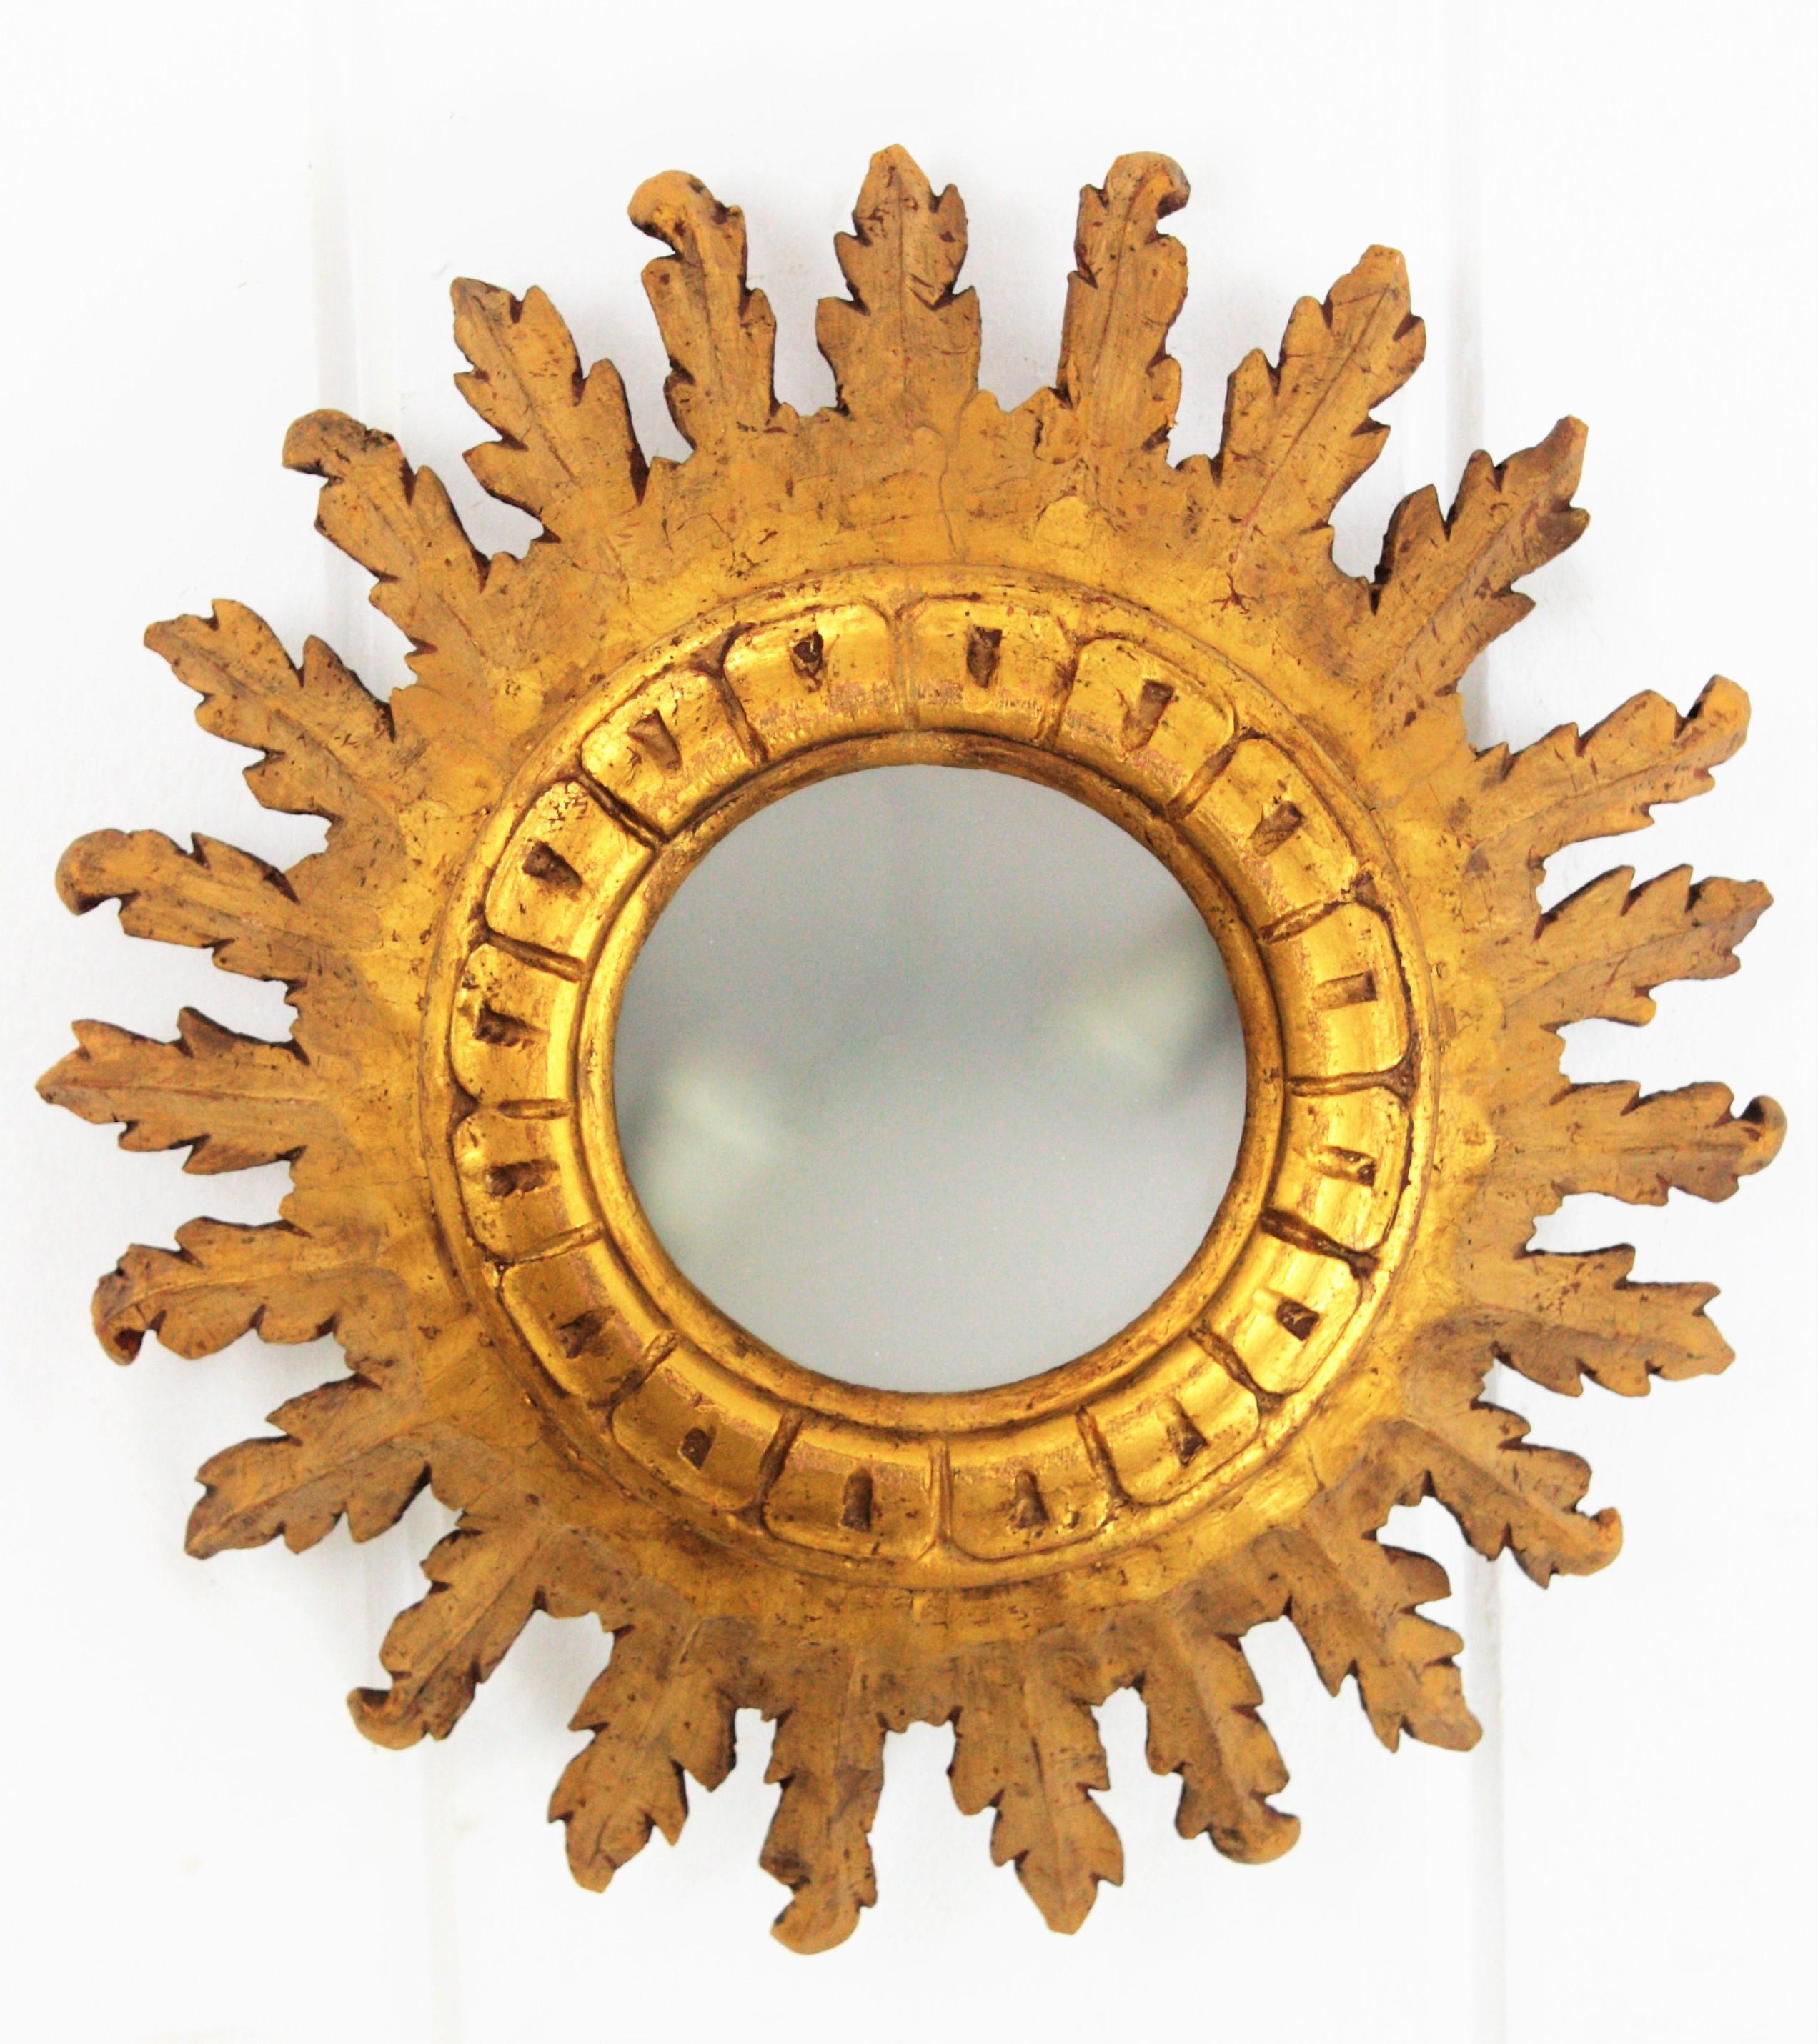 Spanish Baroque Giltwood Crown Sunburst Ceiling Light Fixture with Frosted Glass (Barock)